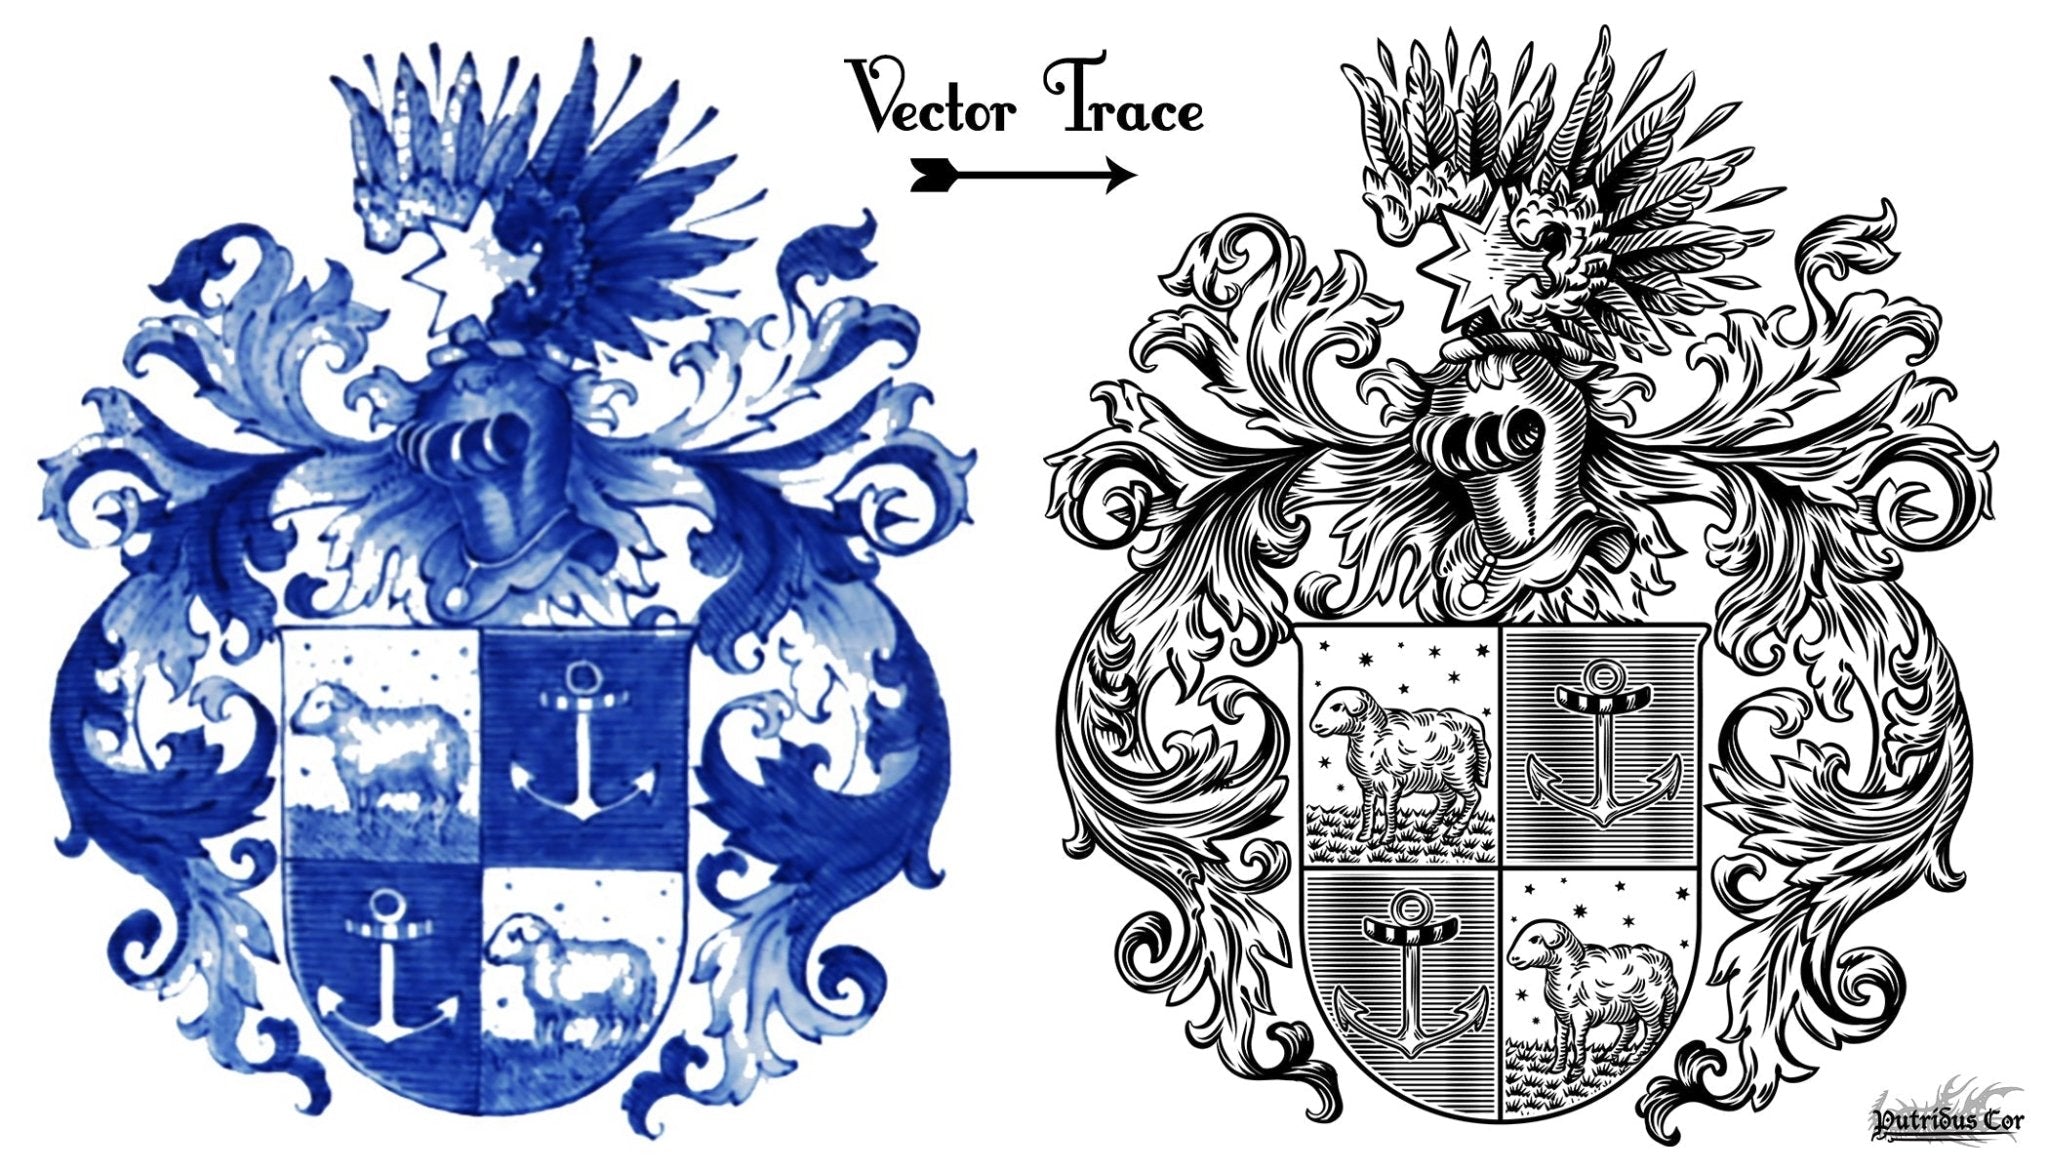 Vector Trace your Heraldry Design, Create your Custom Coat of Arms, Personalized Family Crest, or Emblem Logo, Graphic Design